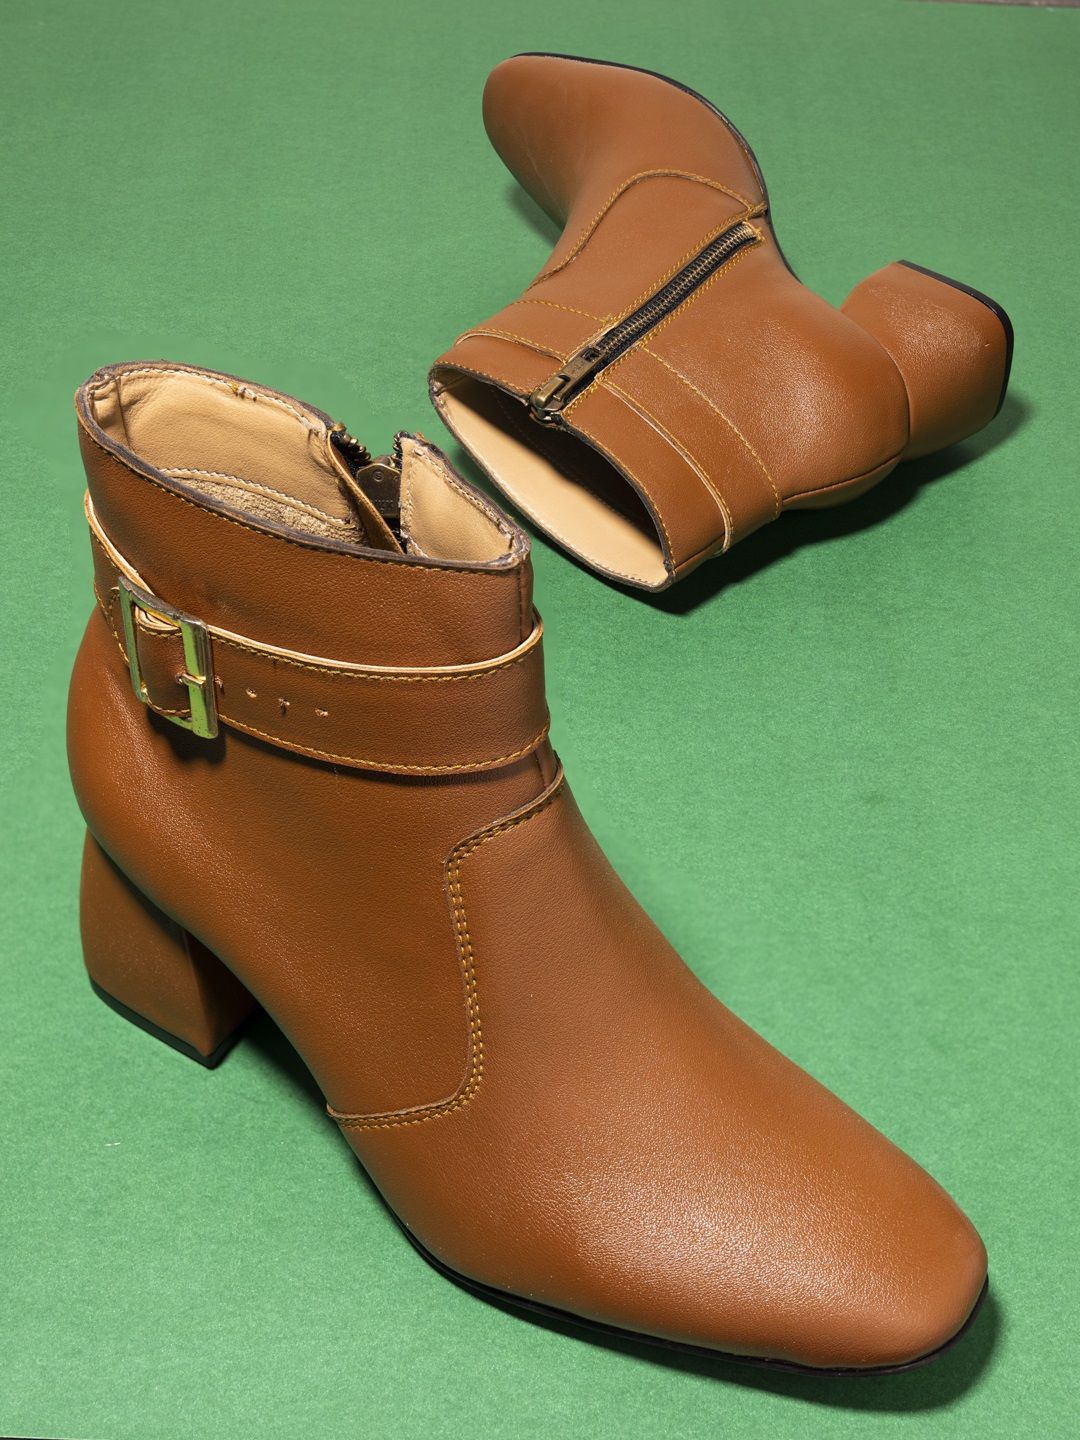 El Paso Tan High-Top Block Heeled Boots with Buckles Price in India